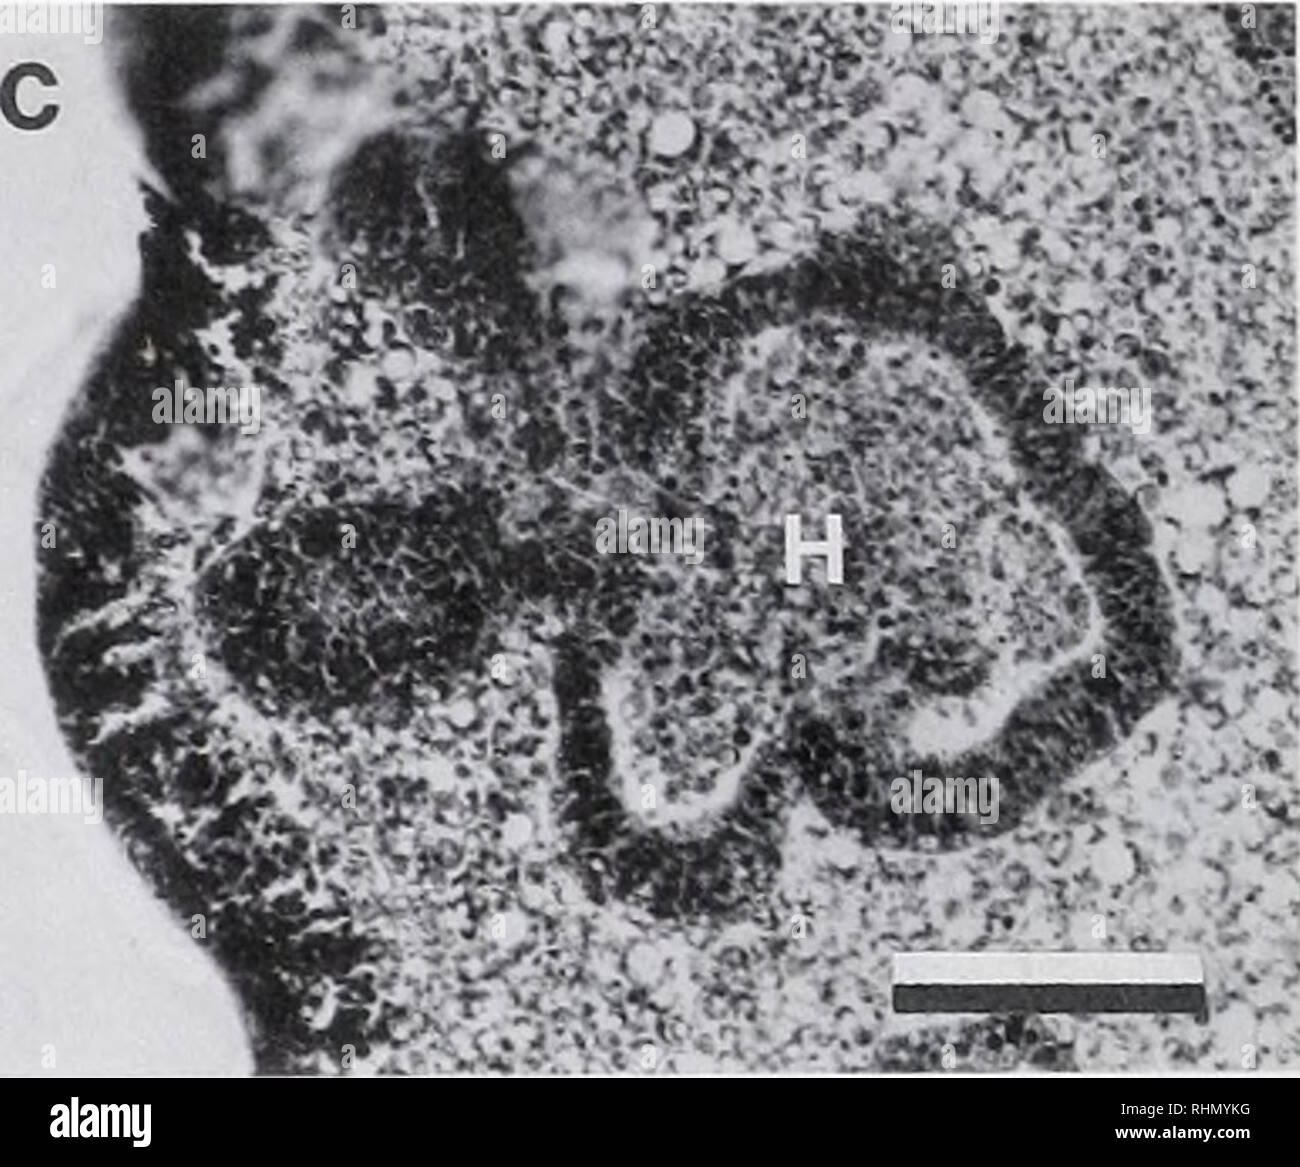 . The Biological bulletin. Biology; Zoology; Biology; Marine Biology. Figure 6. A 75.5-h larvae of Asthenosoma ijimai. a. Light micrograph of live specimen shows five primary podia just beginning to form on left side of larva. Scale bar, 0.5 mm. b. Frontal section with continued hydrocoelic (and podial) development. The hydrocoel (H) is almost completely separated from the archenteron (A). Same scale as a. c. Detail of hydrocoel (H) with parts of two podial extensions from a different section of the same larva as b. Scale bar. 100 ^m. showed the hydrocoelic compartments with thickened epitheli Stock Photo